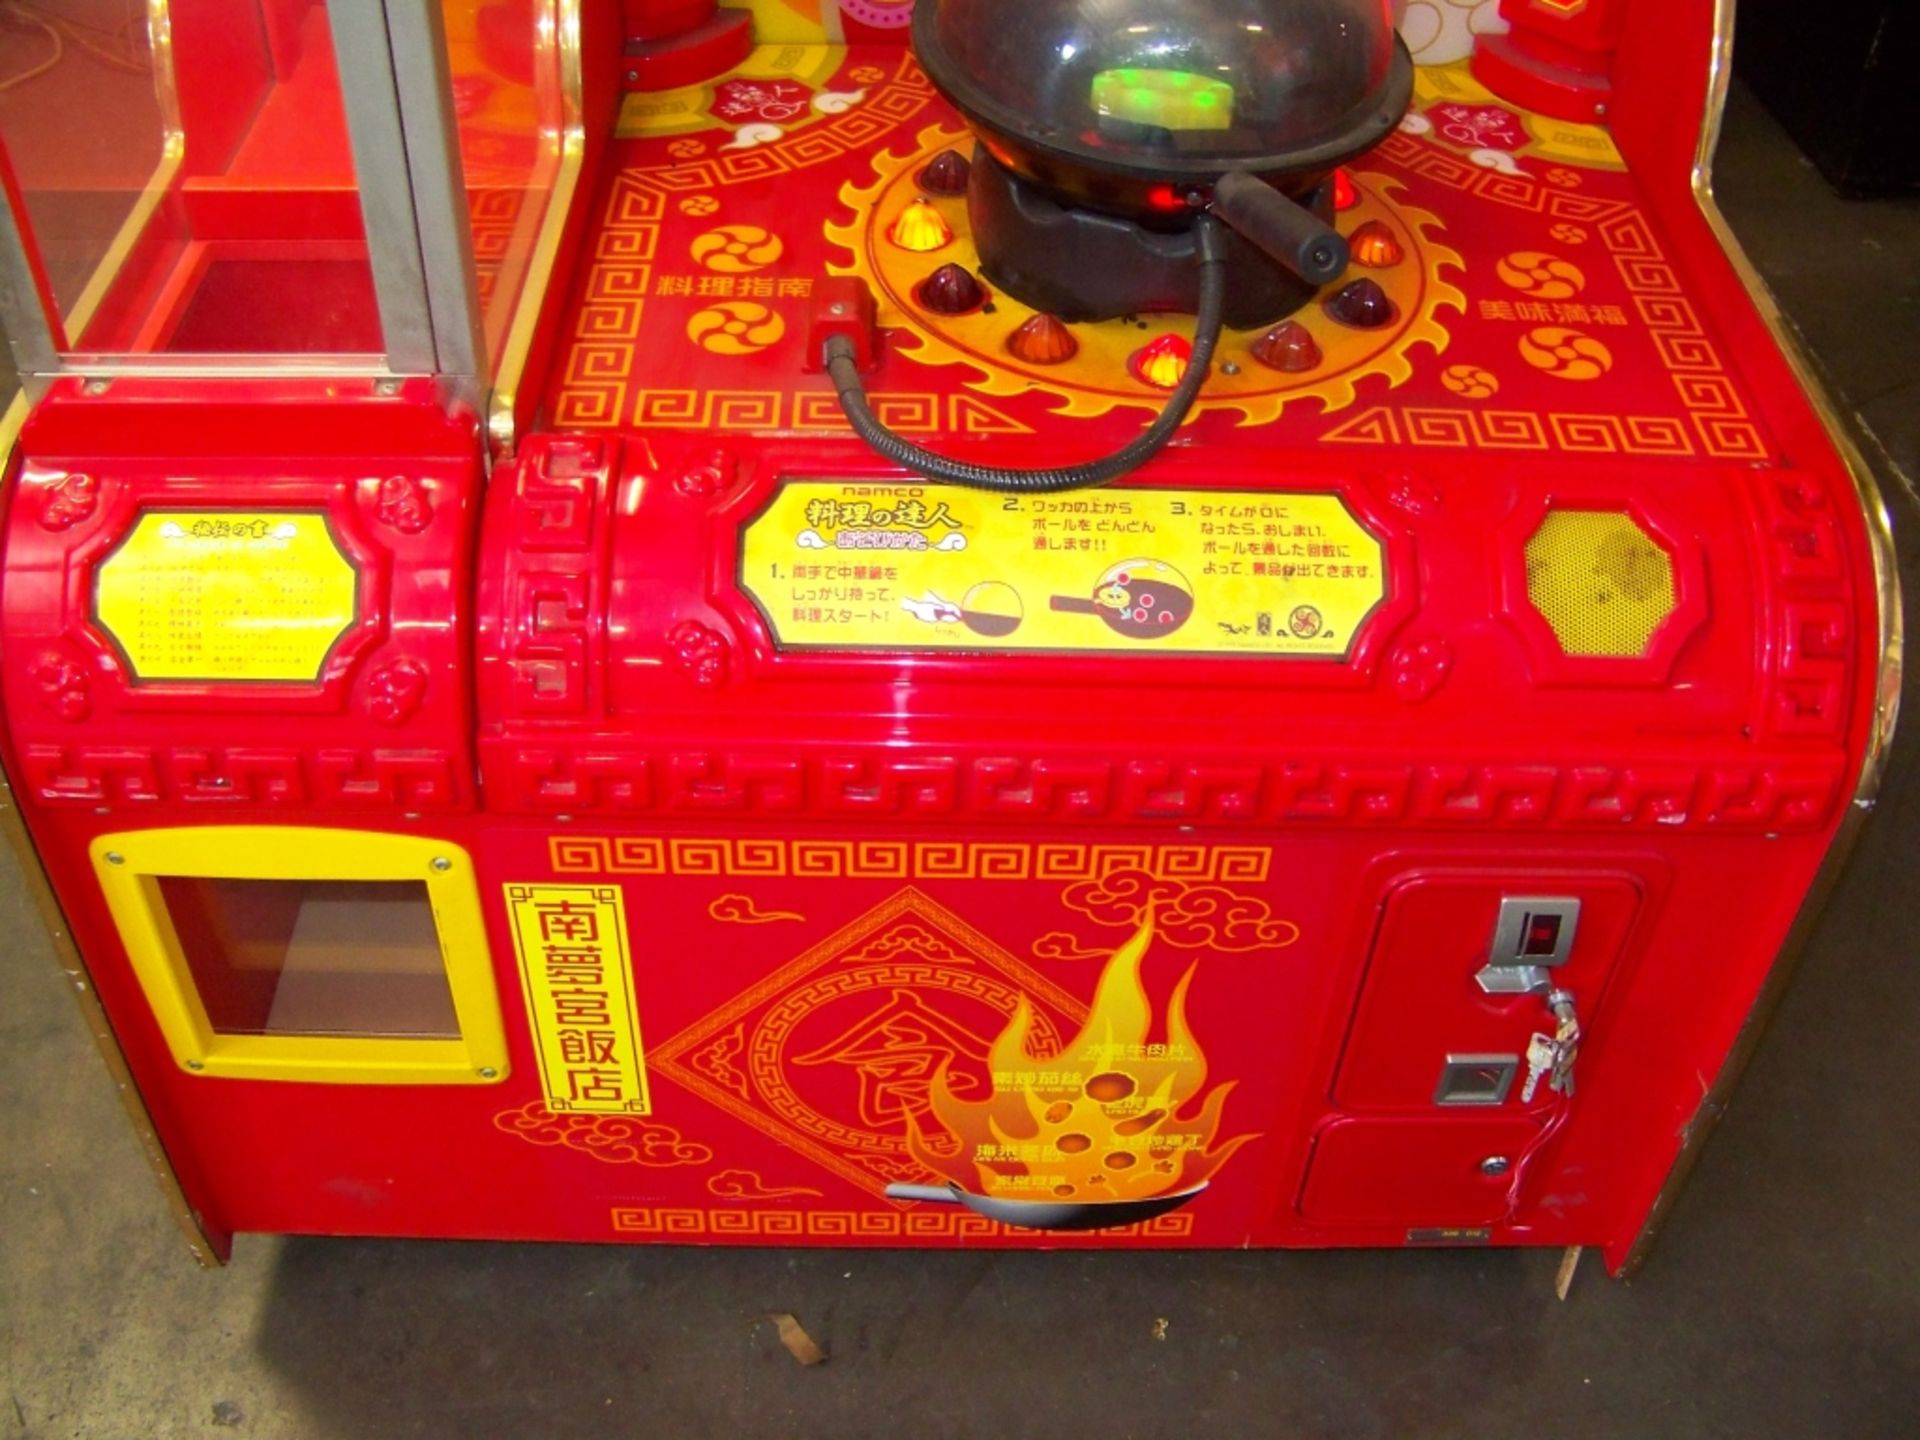 MASTER CHEF PRIZE REDEMPTION ARCADE GAME NAMCO Item is in used condition. Evidence of wear and - Image 4 of 8